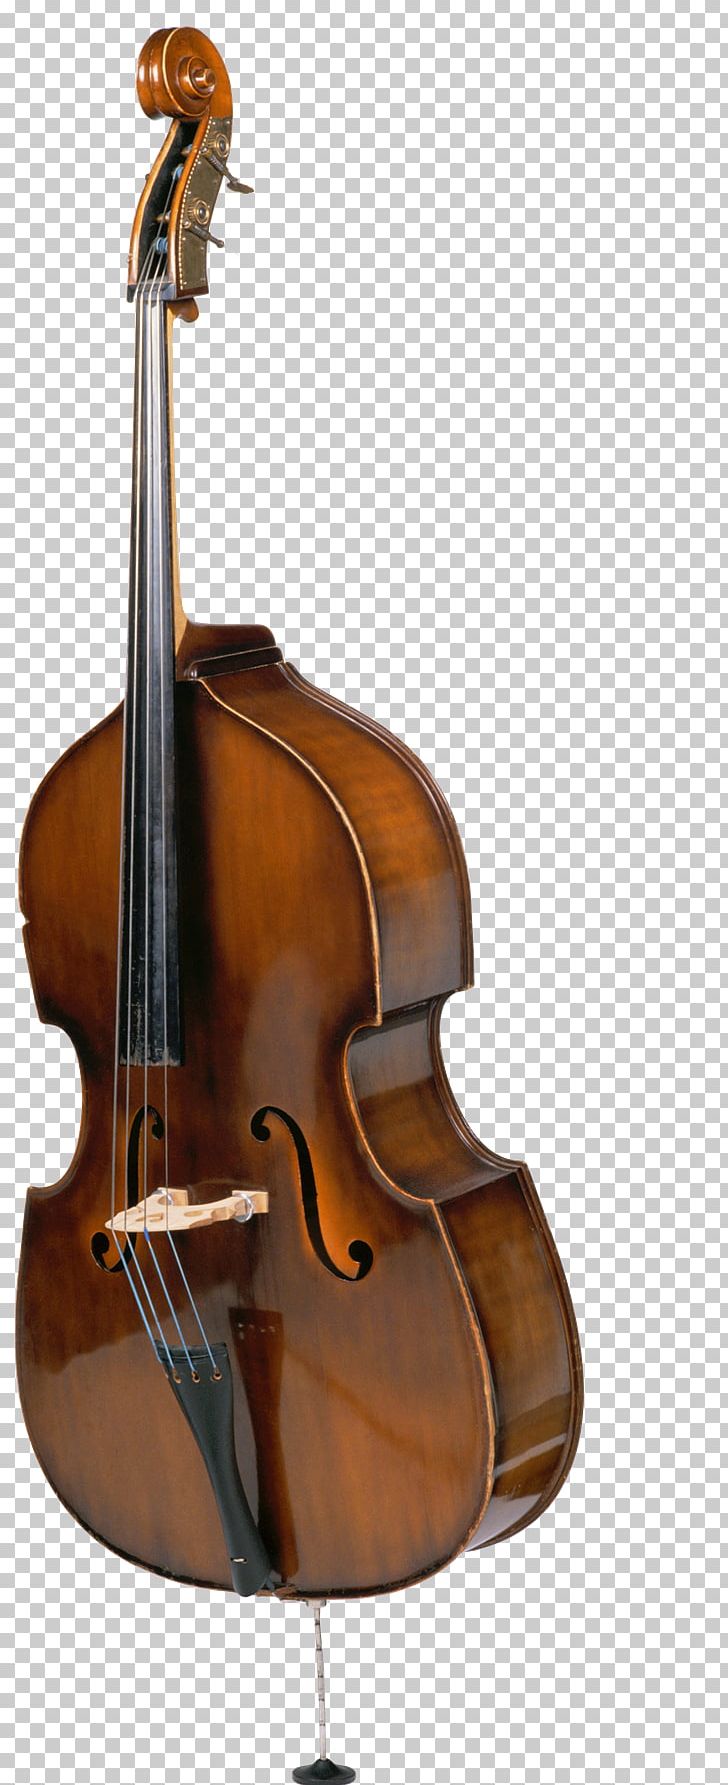 Double Bass Musical Instruments Violin PNG, Clipart, Bass Violin, Cellist, Double Bass, Orchestra, Royaltyfree Free PNG Download